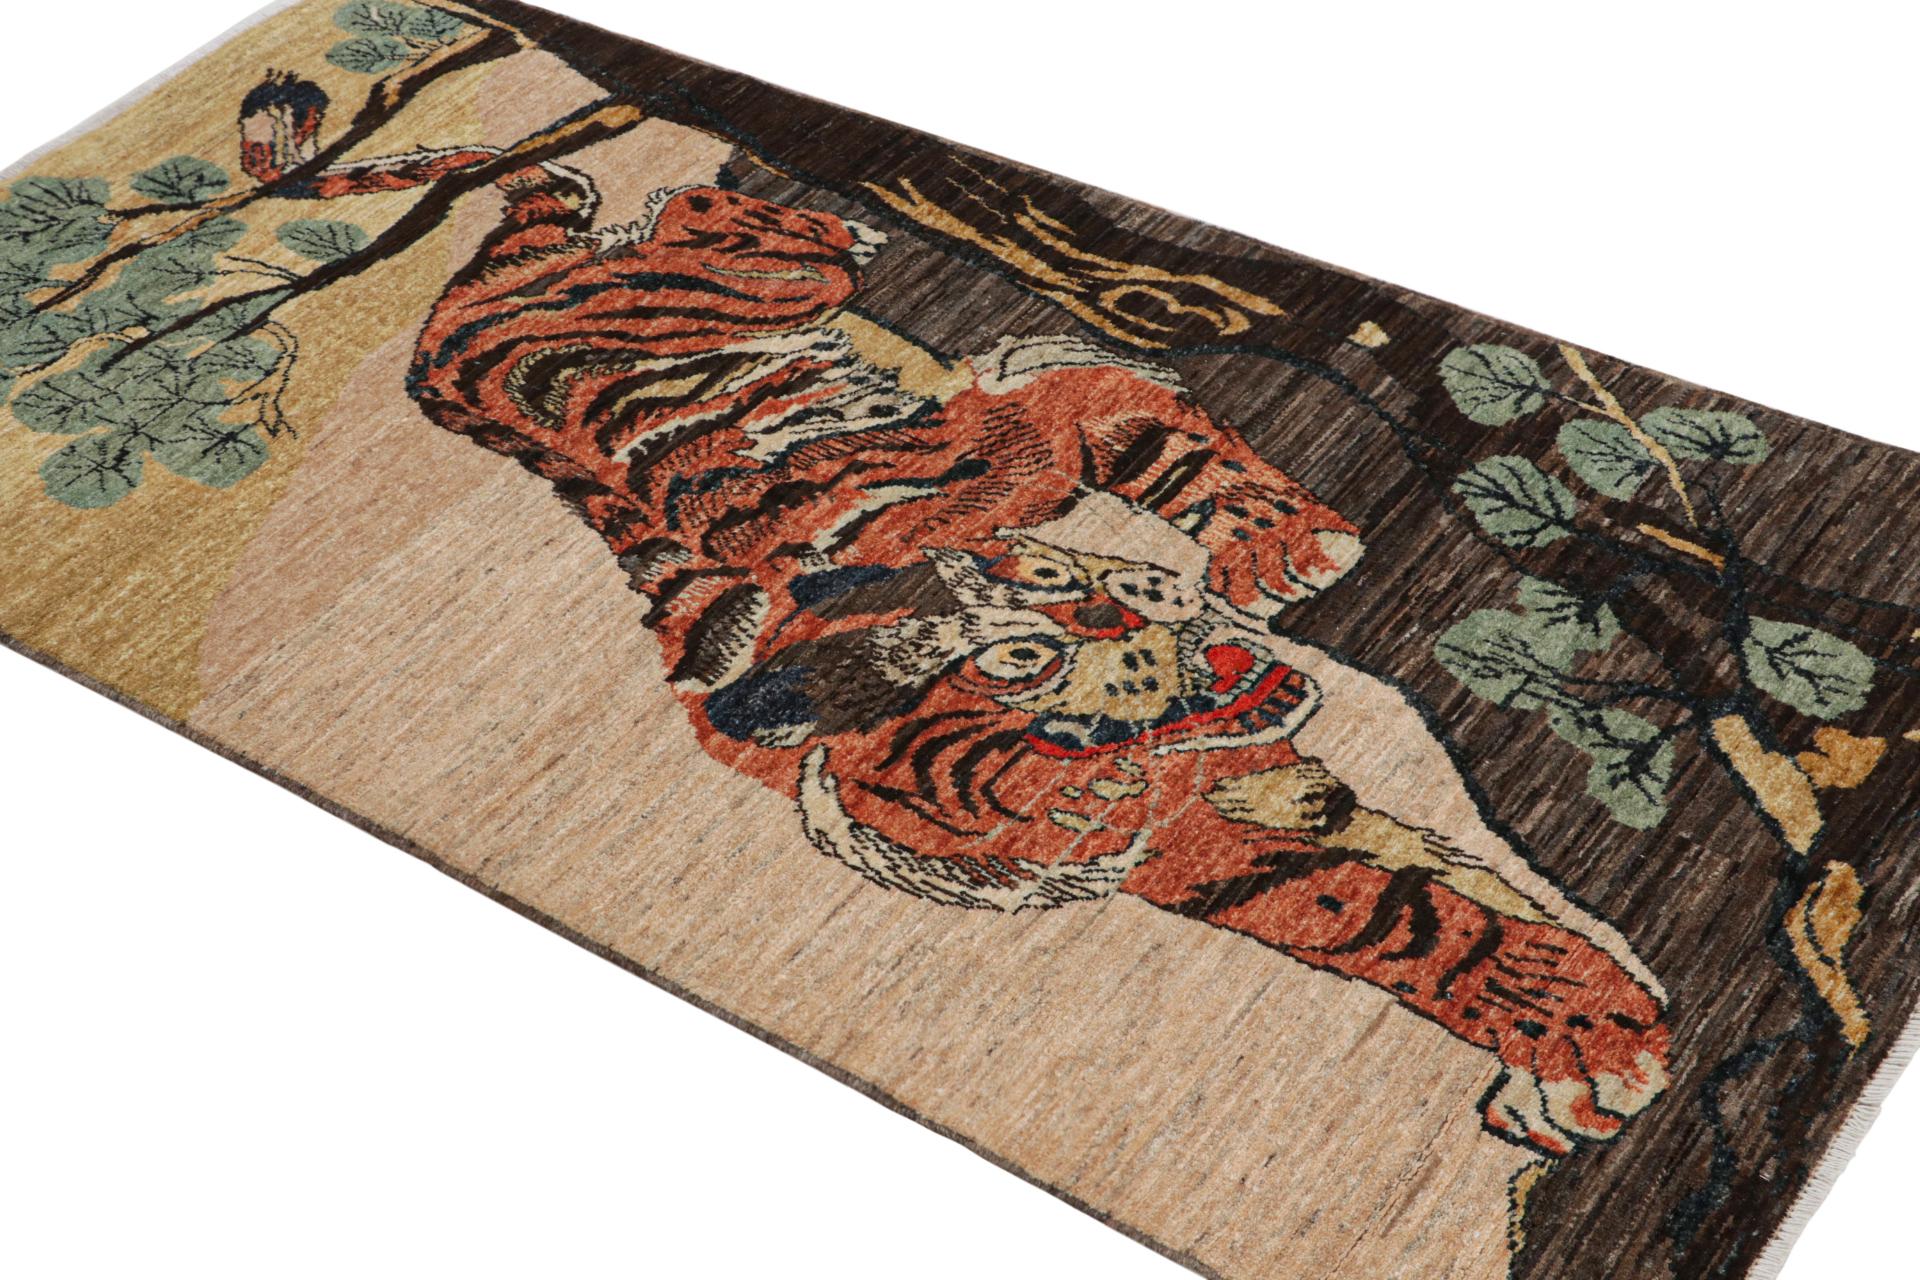 This contemporary 3x6 pictorial runner is a bold new addition to Rug & Kilim’s Tigers Collection. Our collection spans several cultures and recaptures iconic pictorial styles in folk art and handmade Oriental rugs alike. 

On the Design:

Inspired